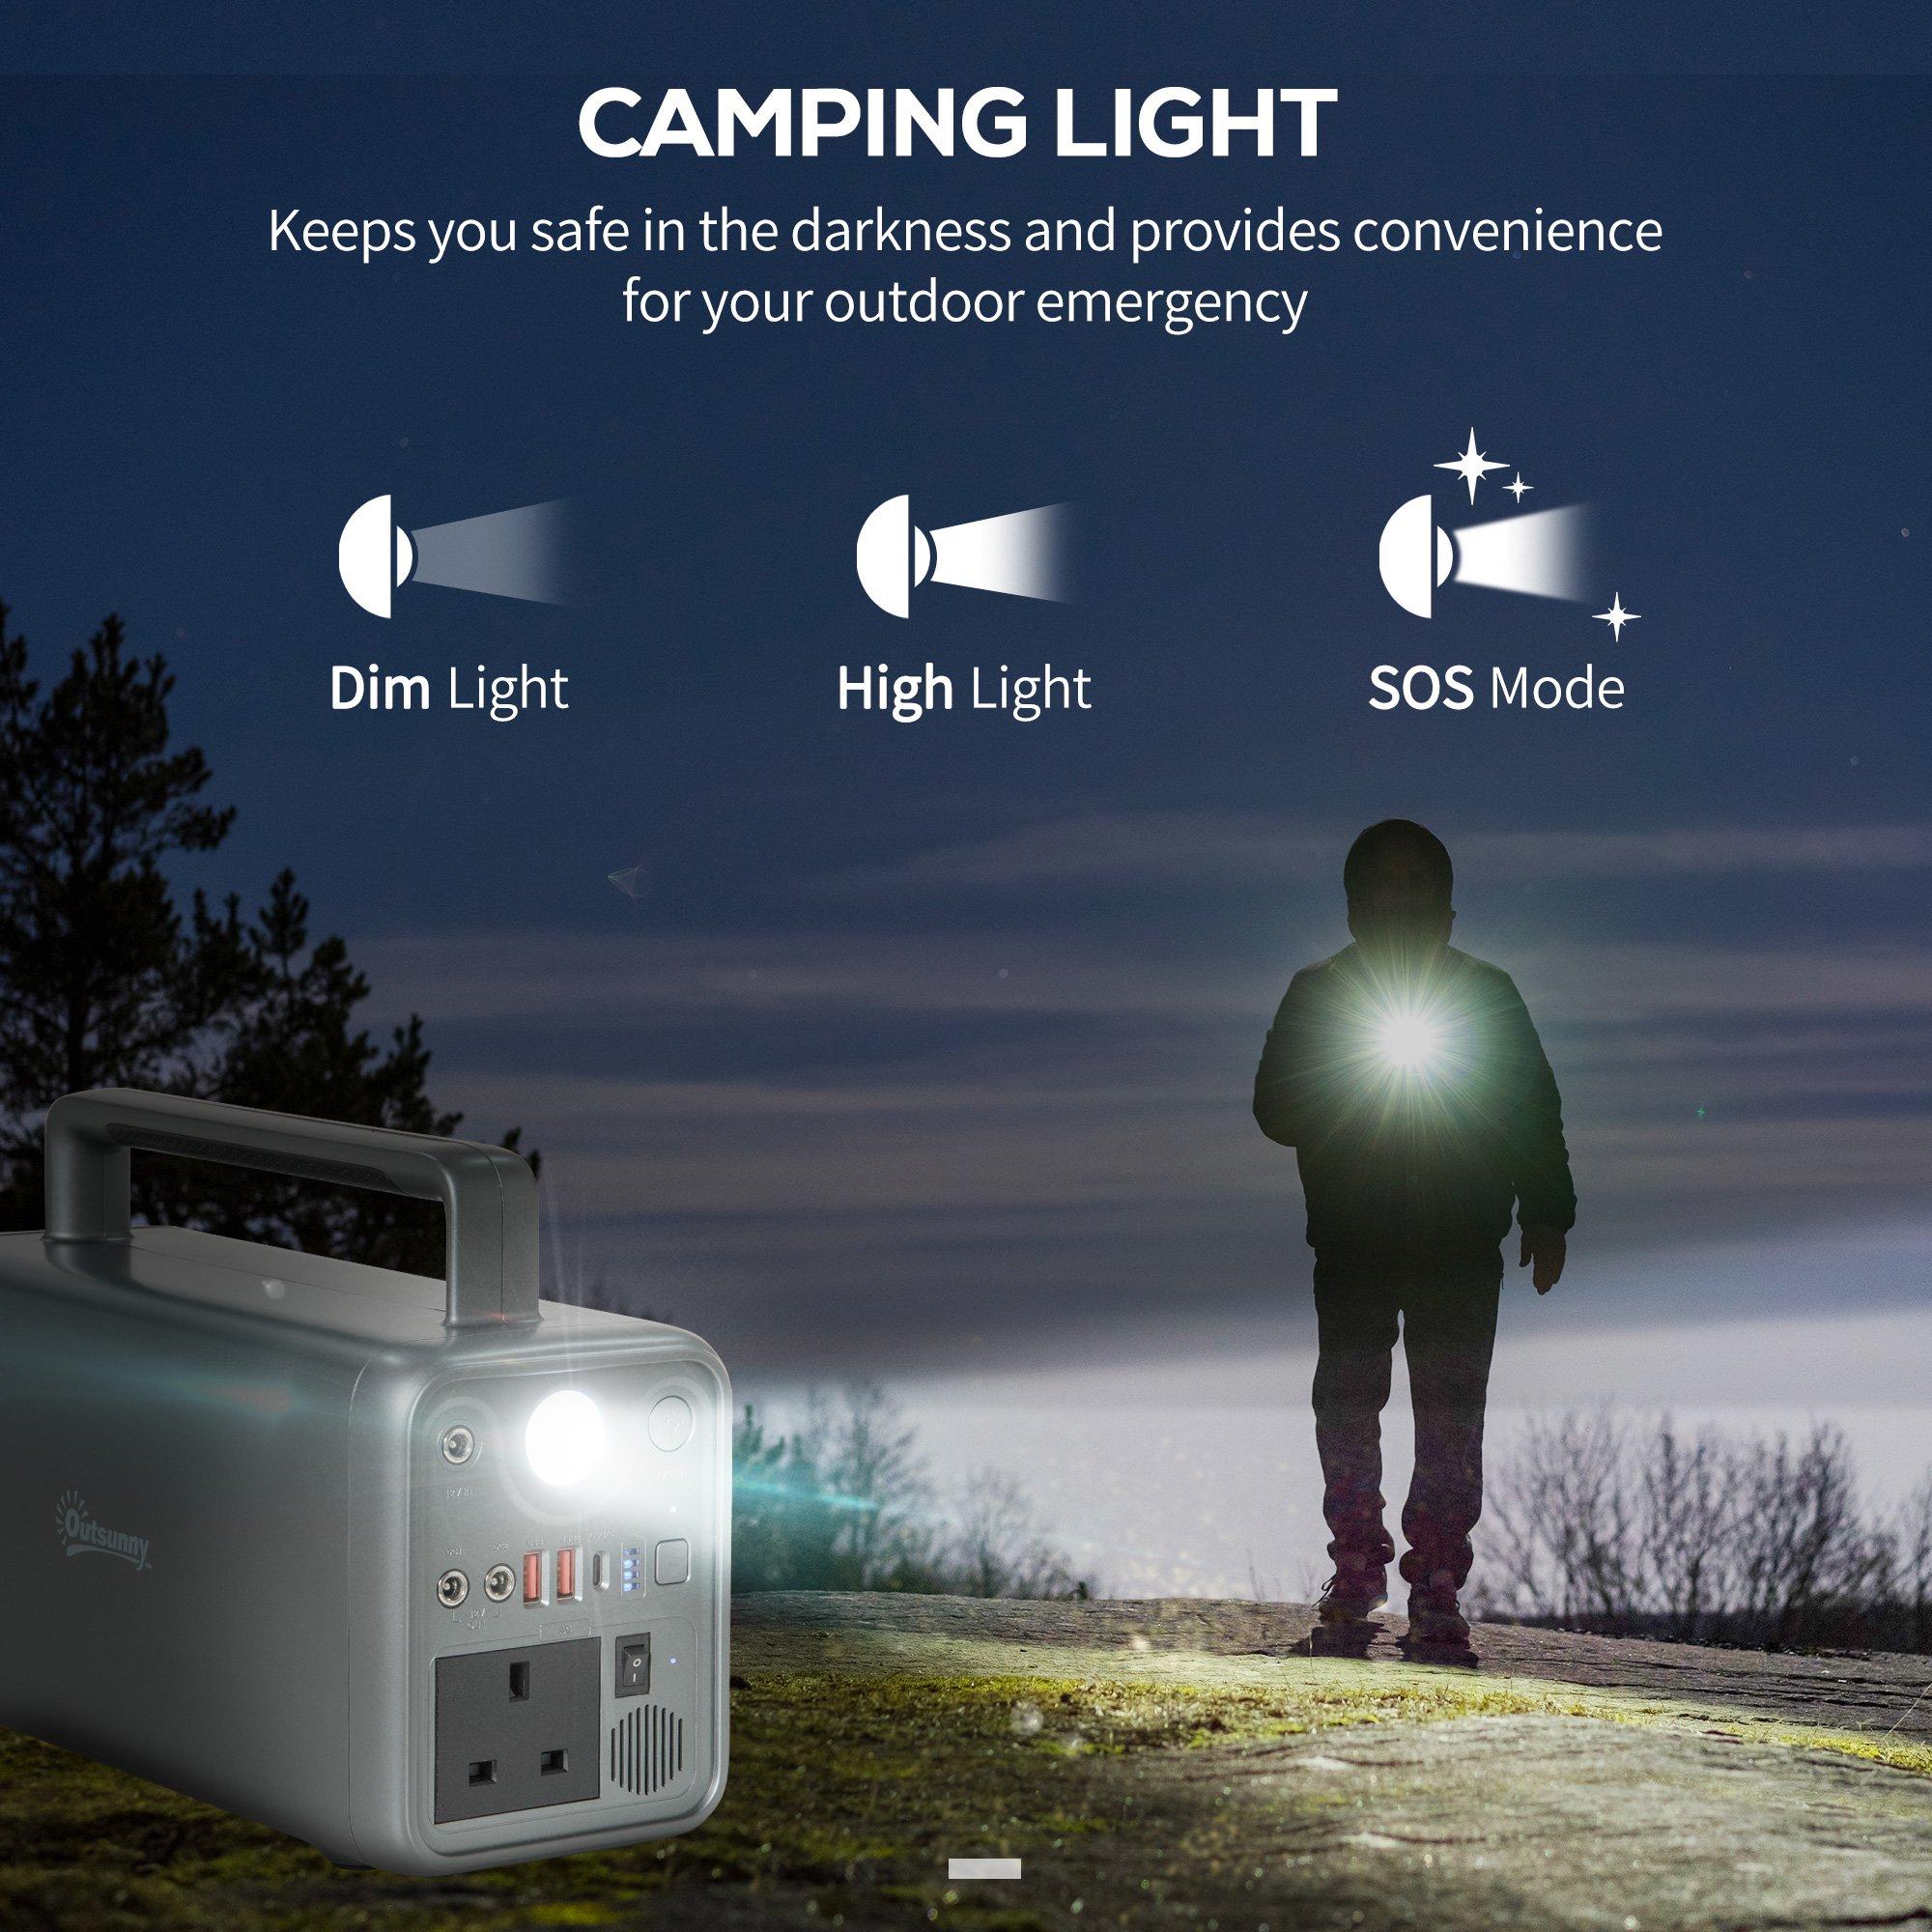 Camping, 230.4Wh Portable Power Station with AC Outlets USB/PD/CAR Ports